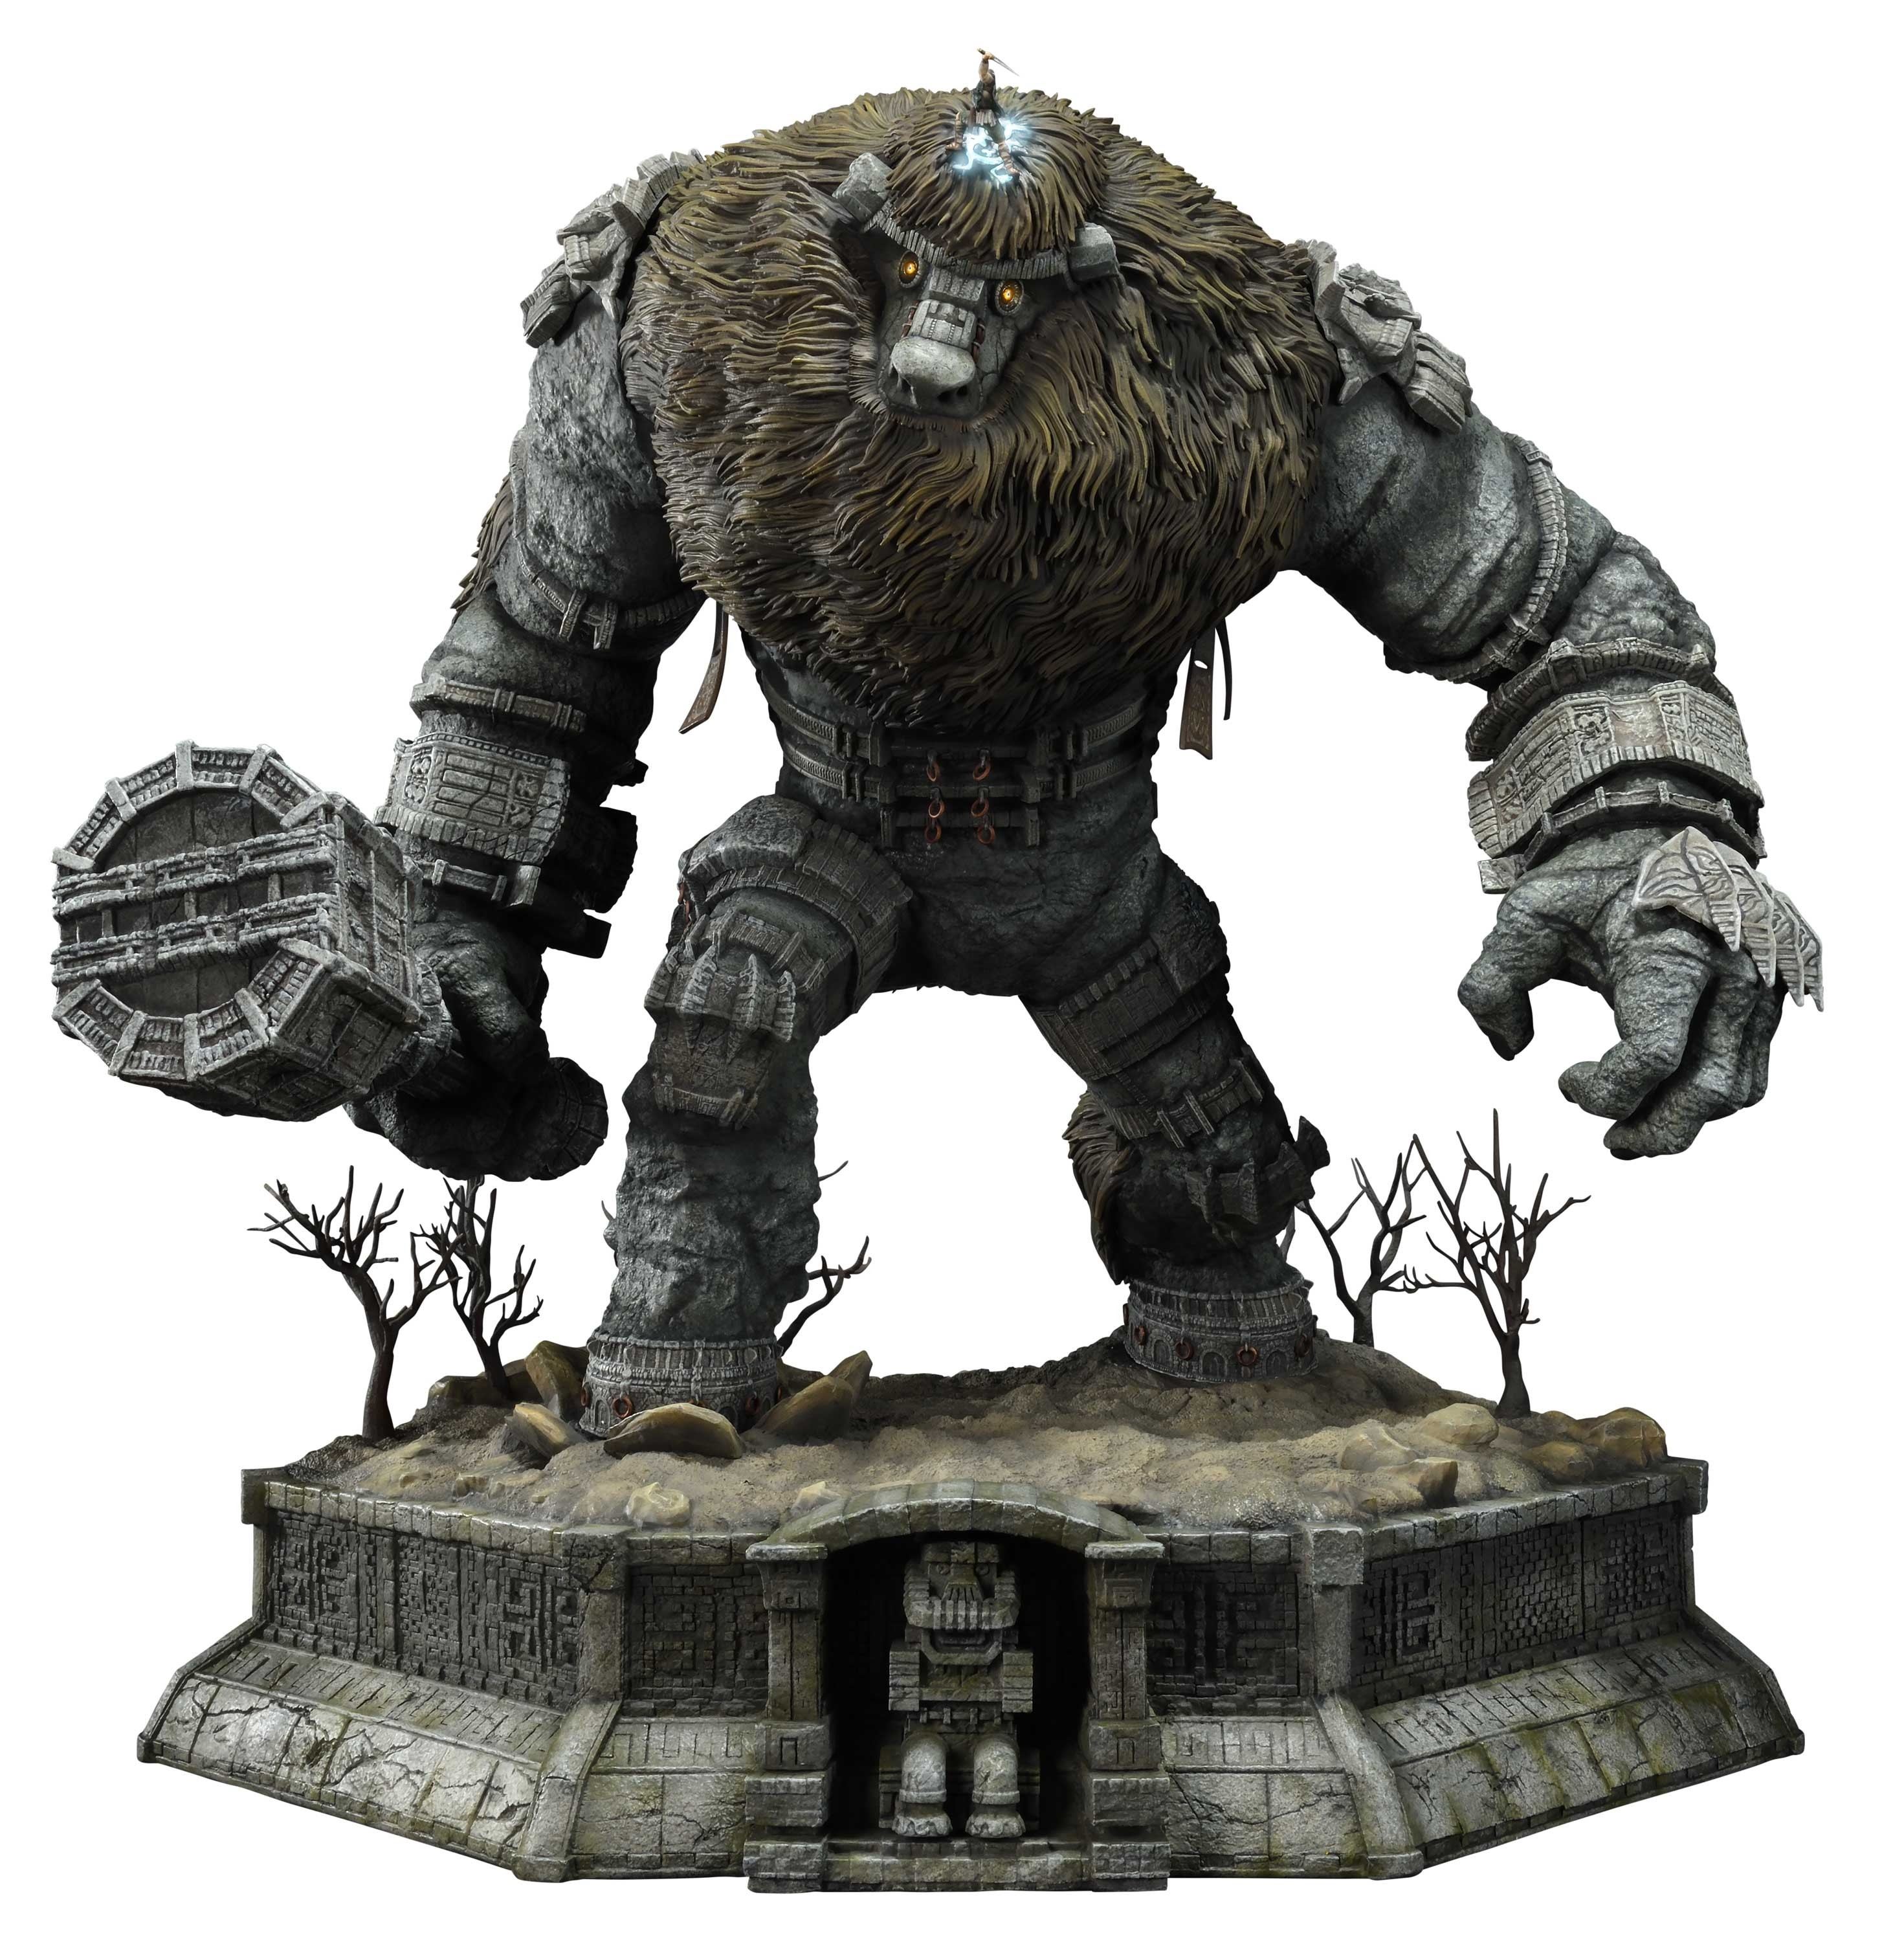 ULTIMATE DIORAMA MASTERLINE SHADOW OF THE COLOSSUS STATUE: THE FIRST COLOSSUS EX VER. Prime 1 Studio